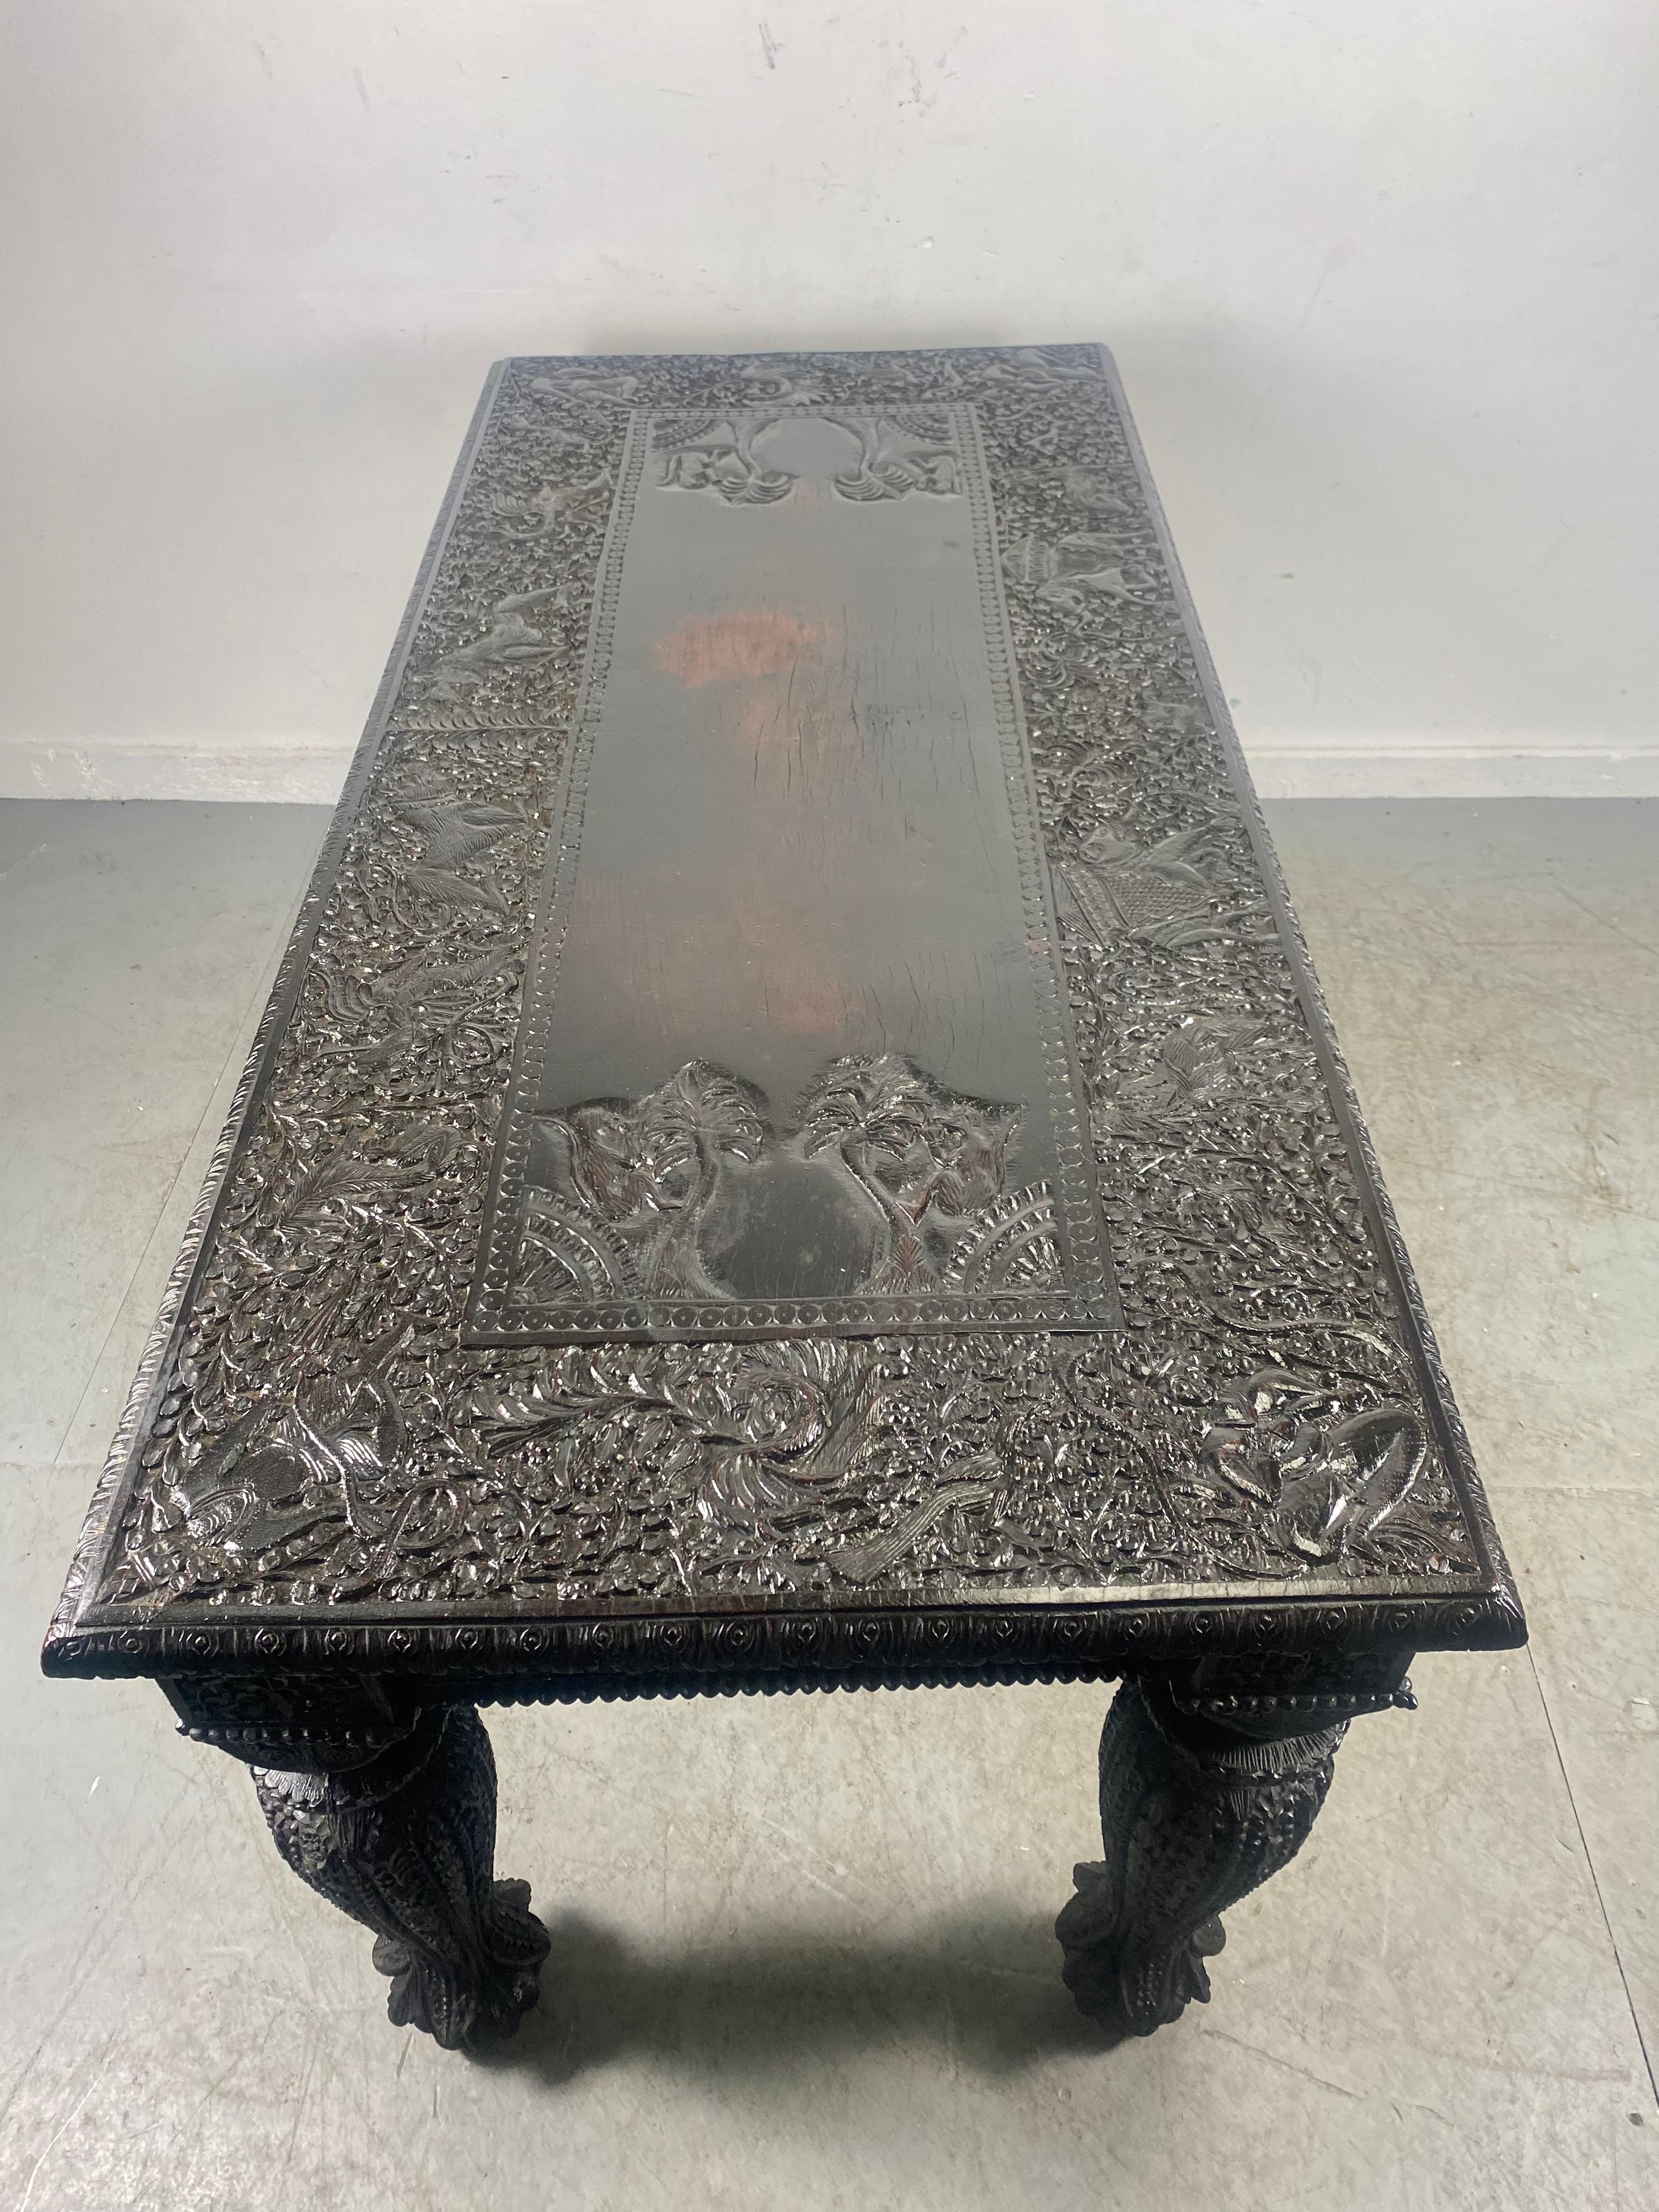 ExquisItely carved Turn or the century Anglo Indian Table, dining/desk/library. Amazing detailing, hand carved animals, elephants, monkeys, Deities (each corner). Hand delivery avail to New York City or anywhere en route from Buffalo NY.